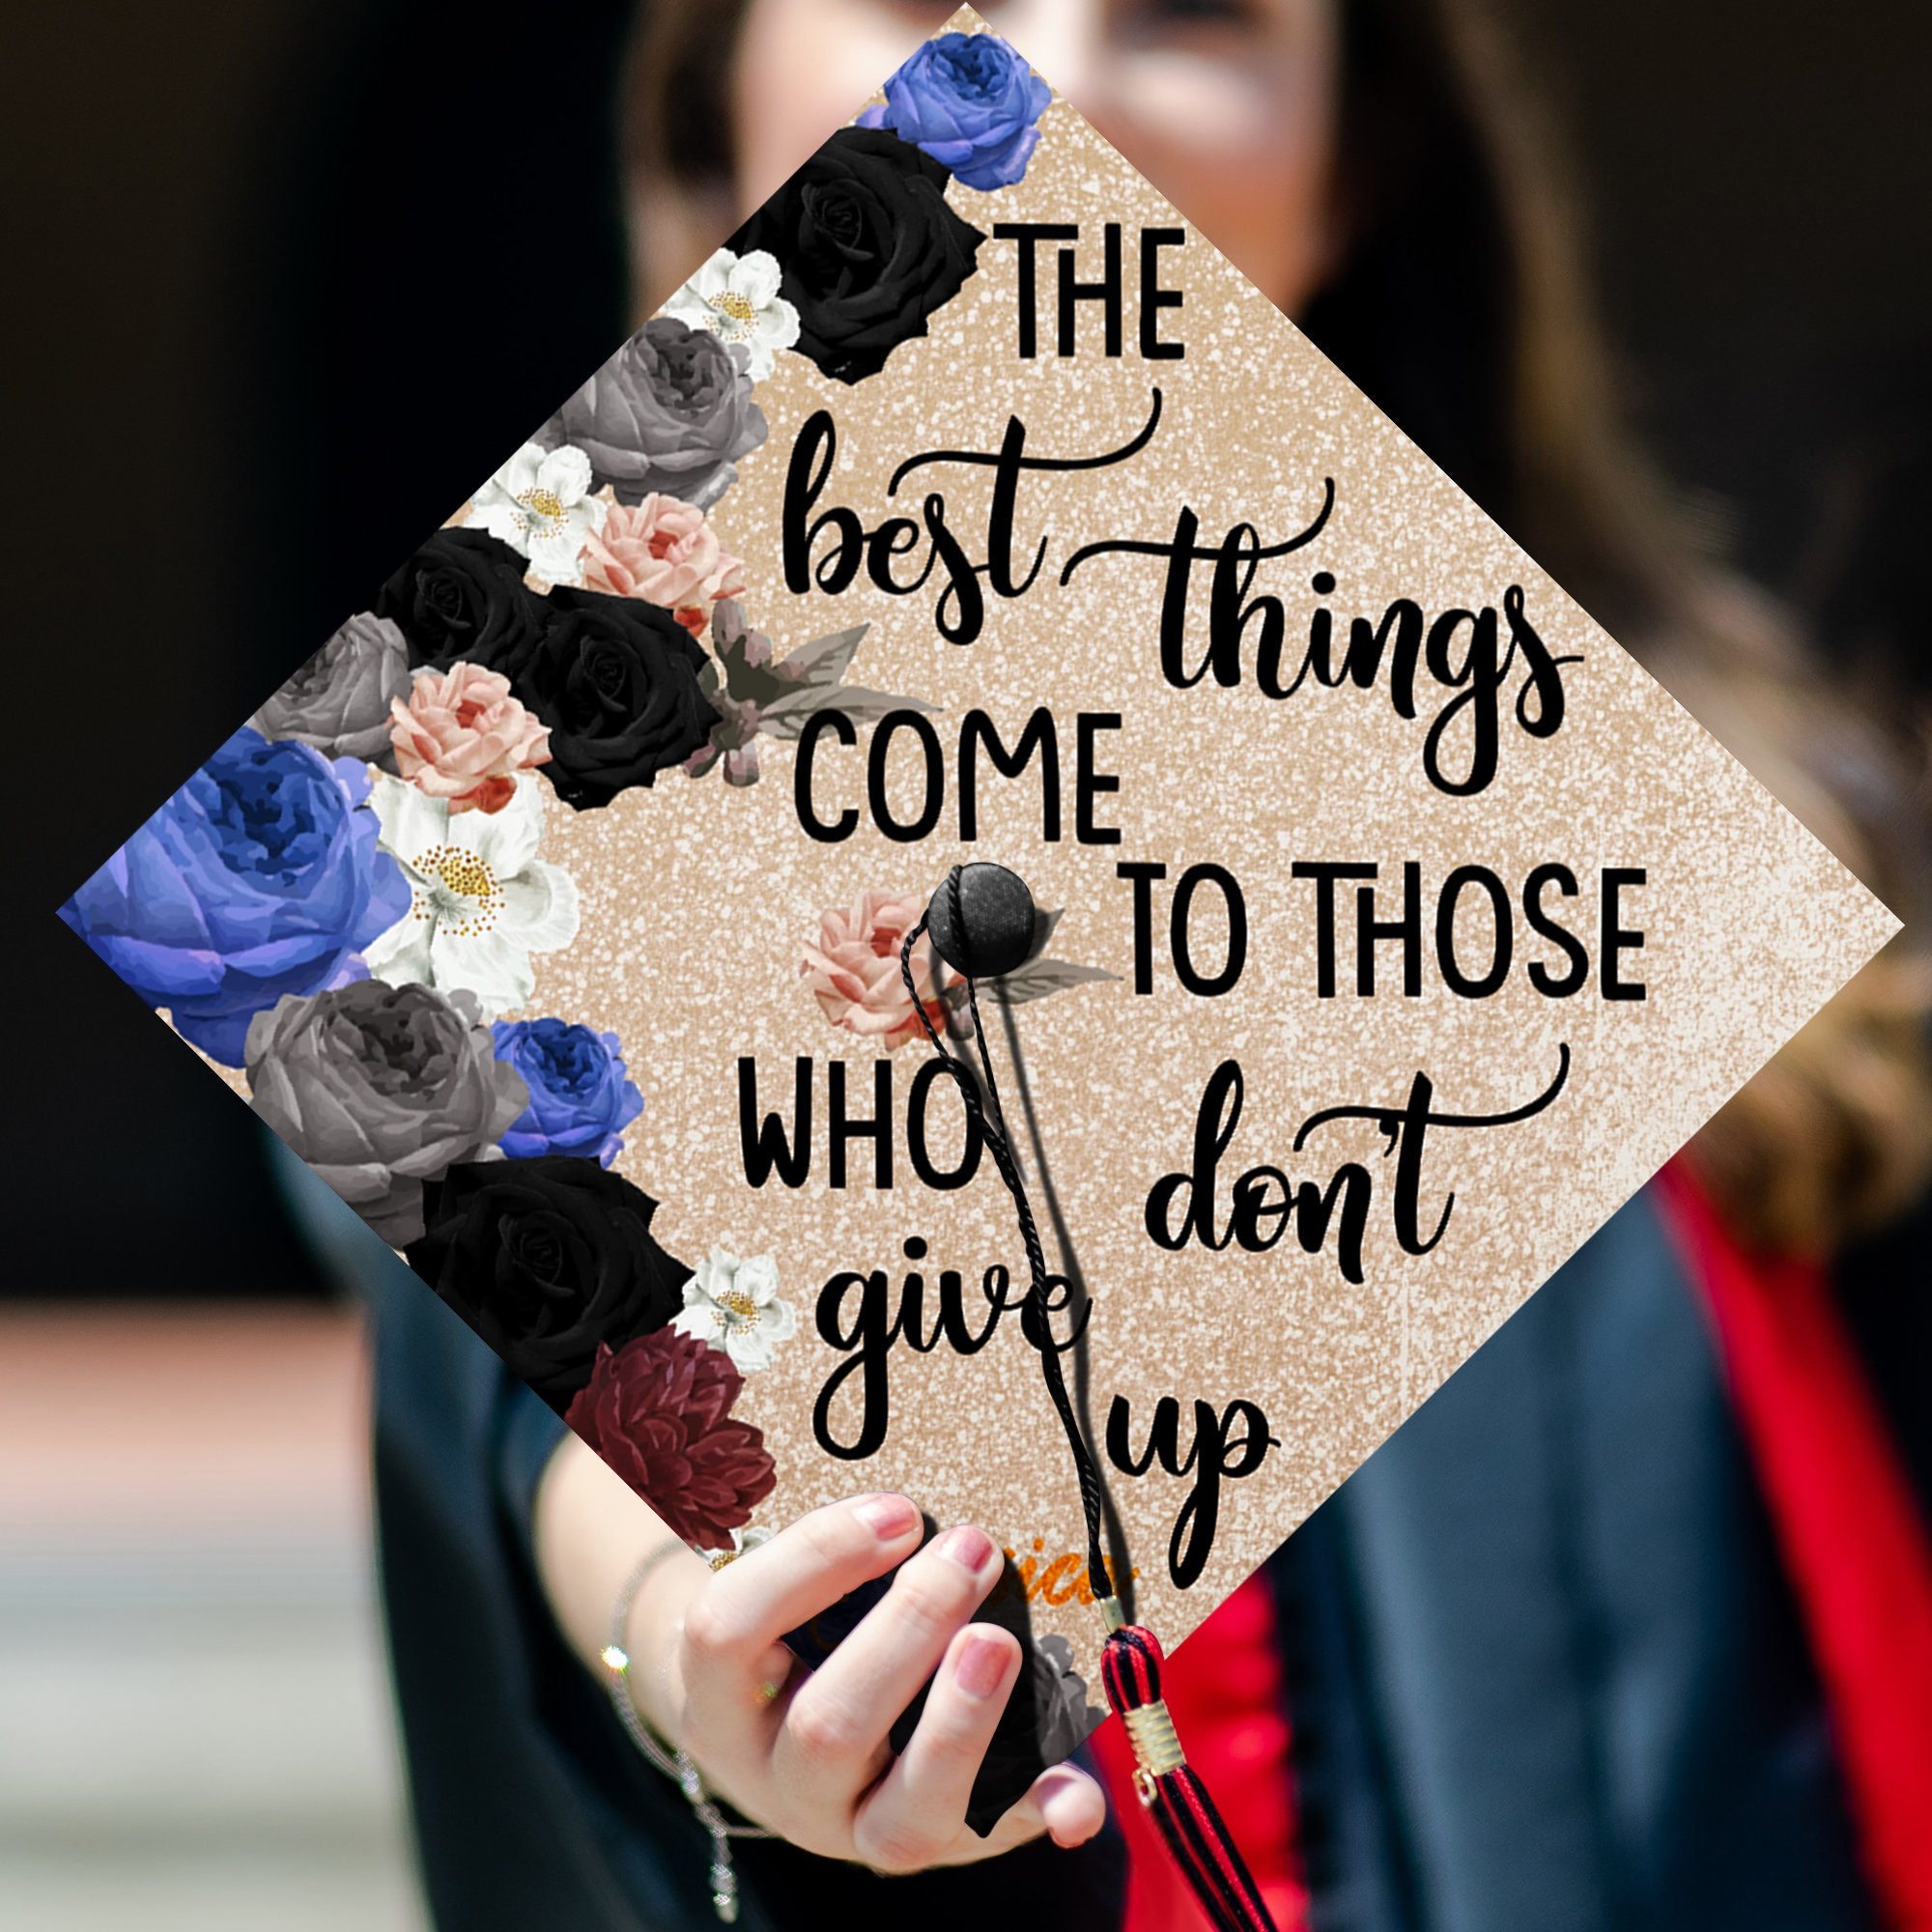 72 Funny Graduation Cap Owners Who Will Go Far In Life